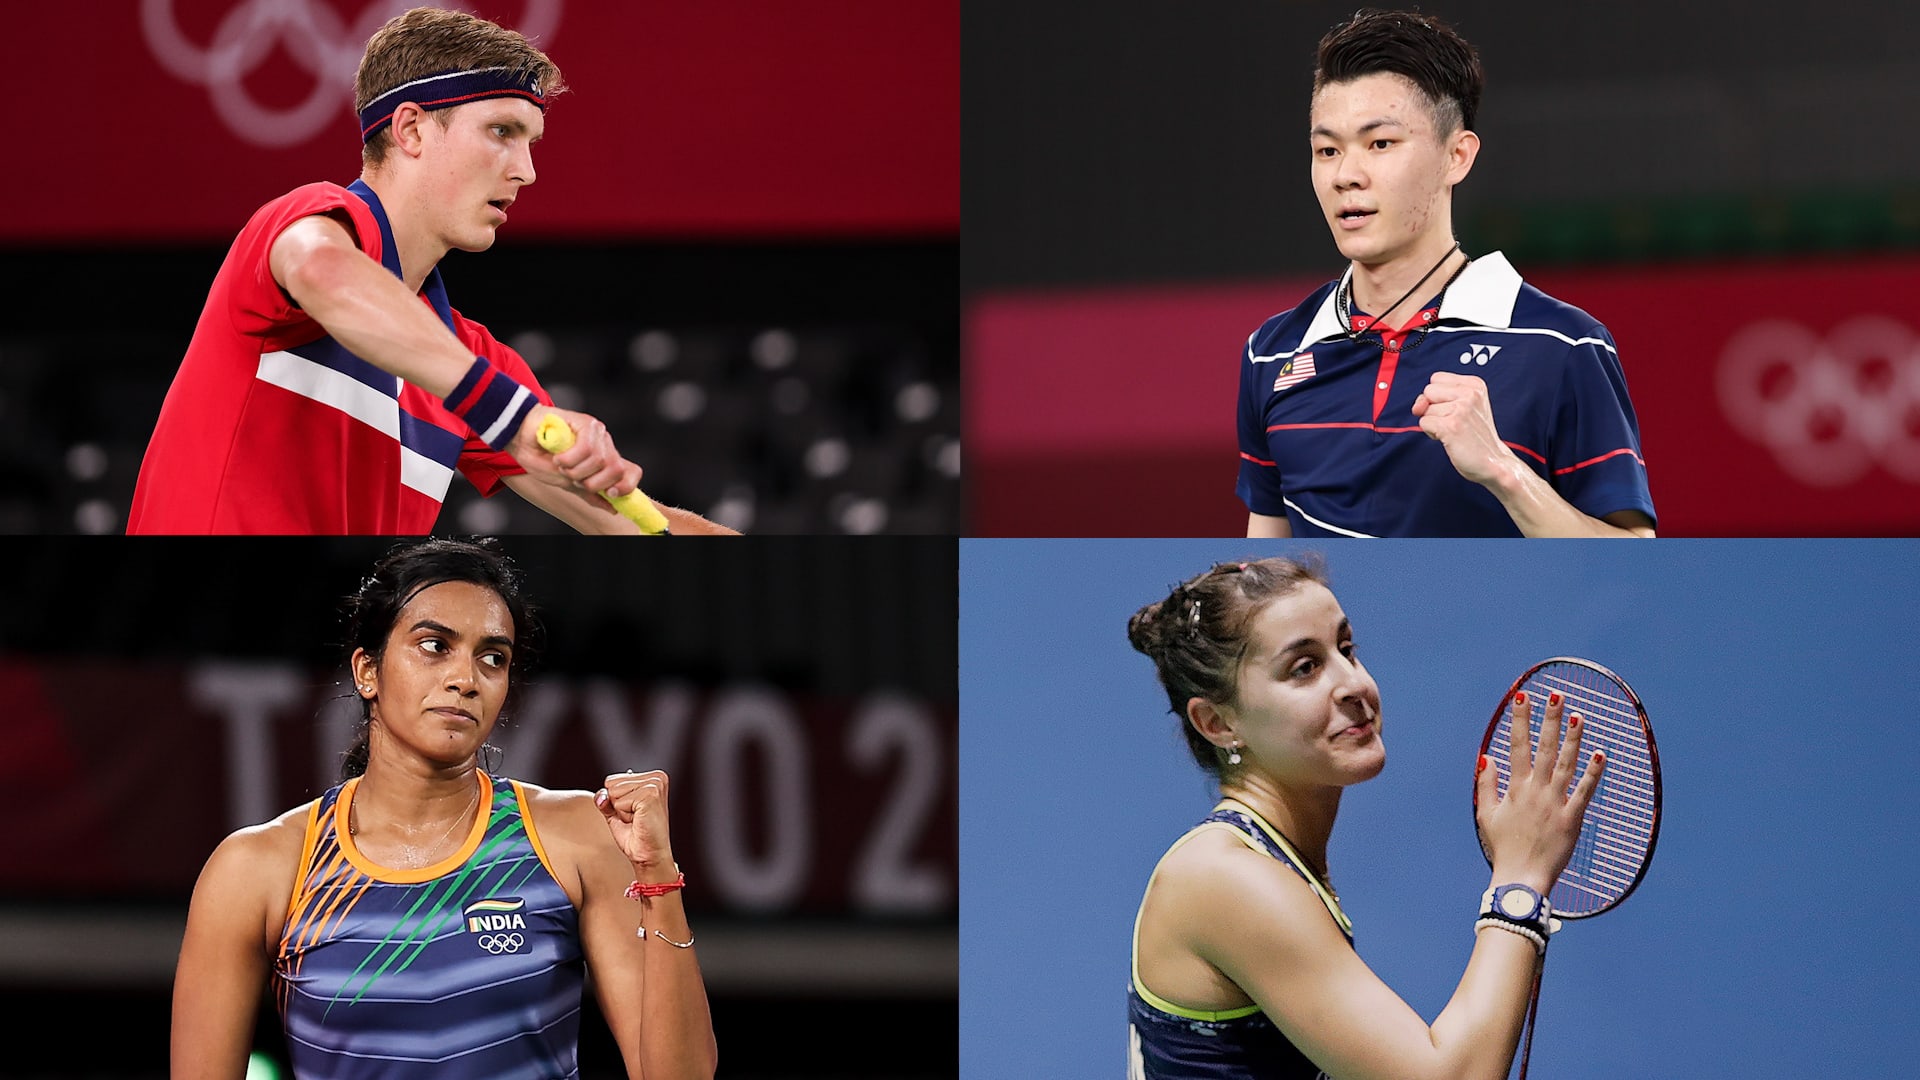 BWF Thomas and Uber Cup Finals 2022 Preview, schedule, and stars to watch in Bangkok